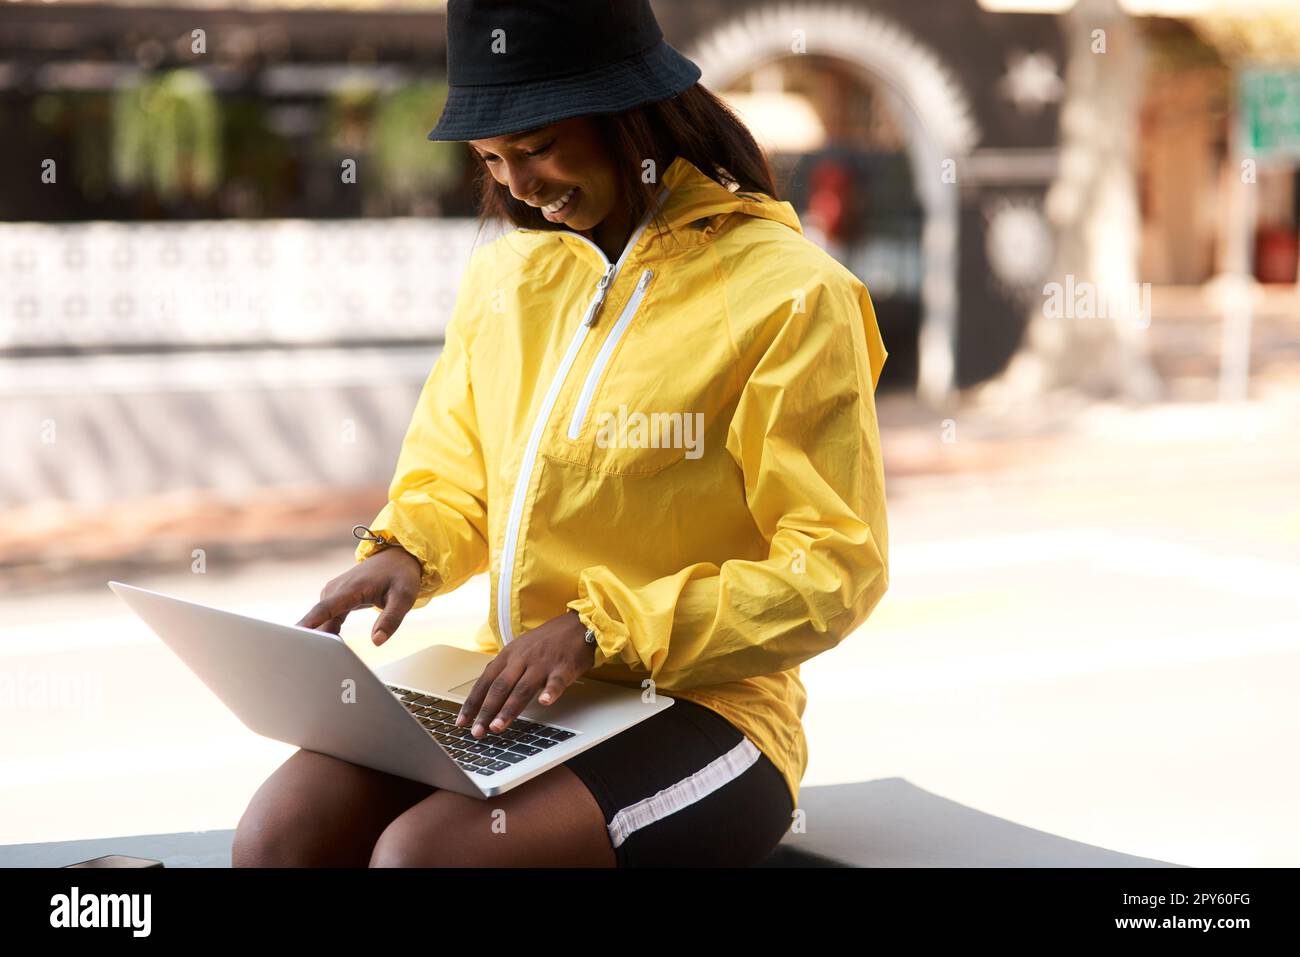 Dare to stand out and be yourself to the fullest. an attractive young woman using a laptop while relaxing outdoors in the city. Stock Photo